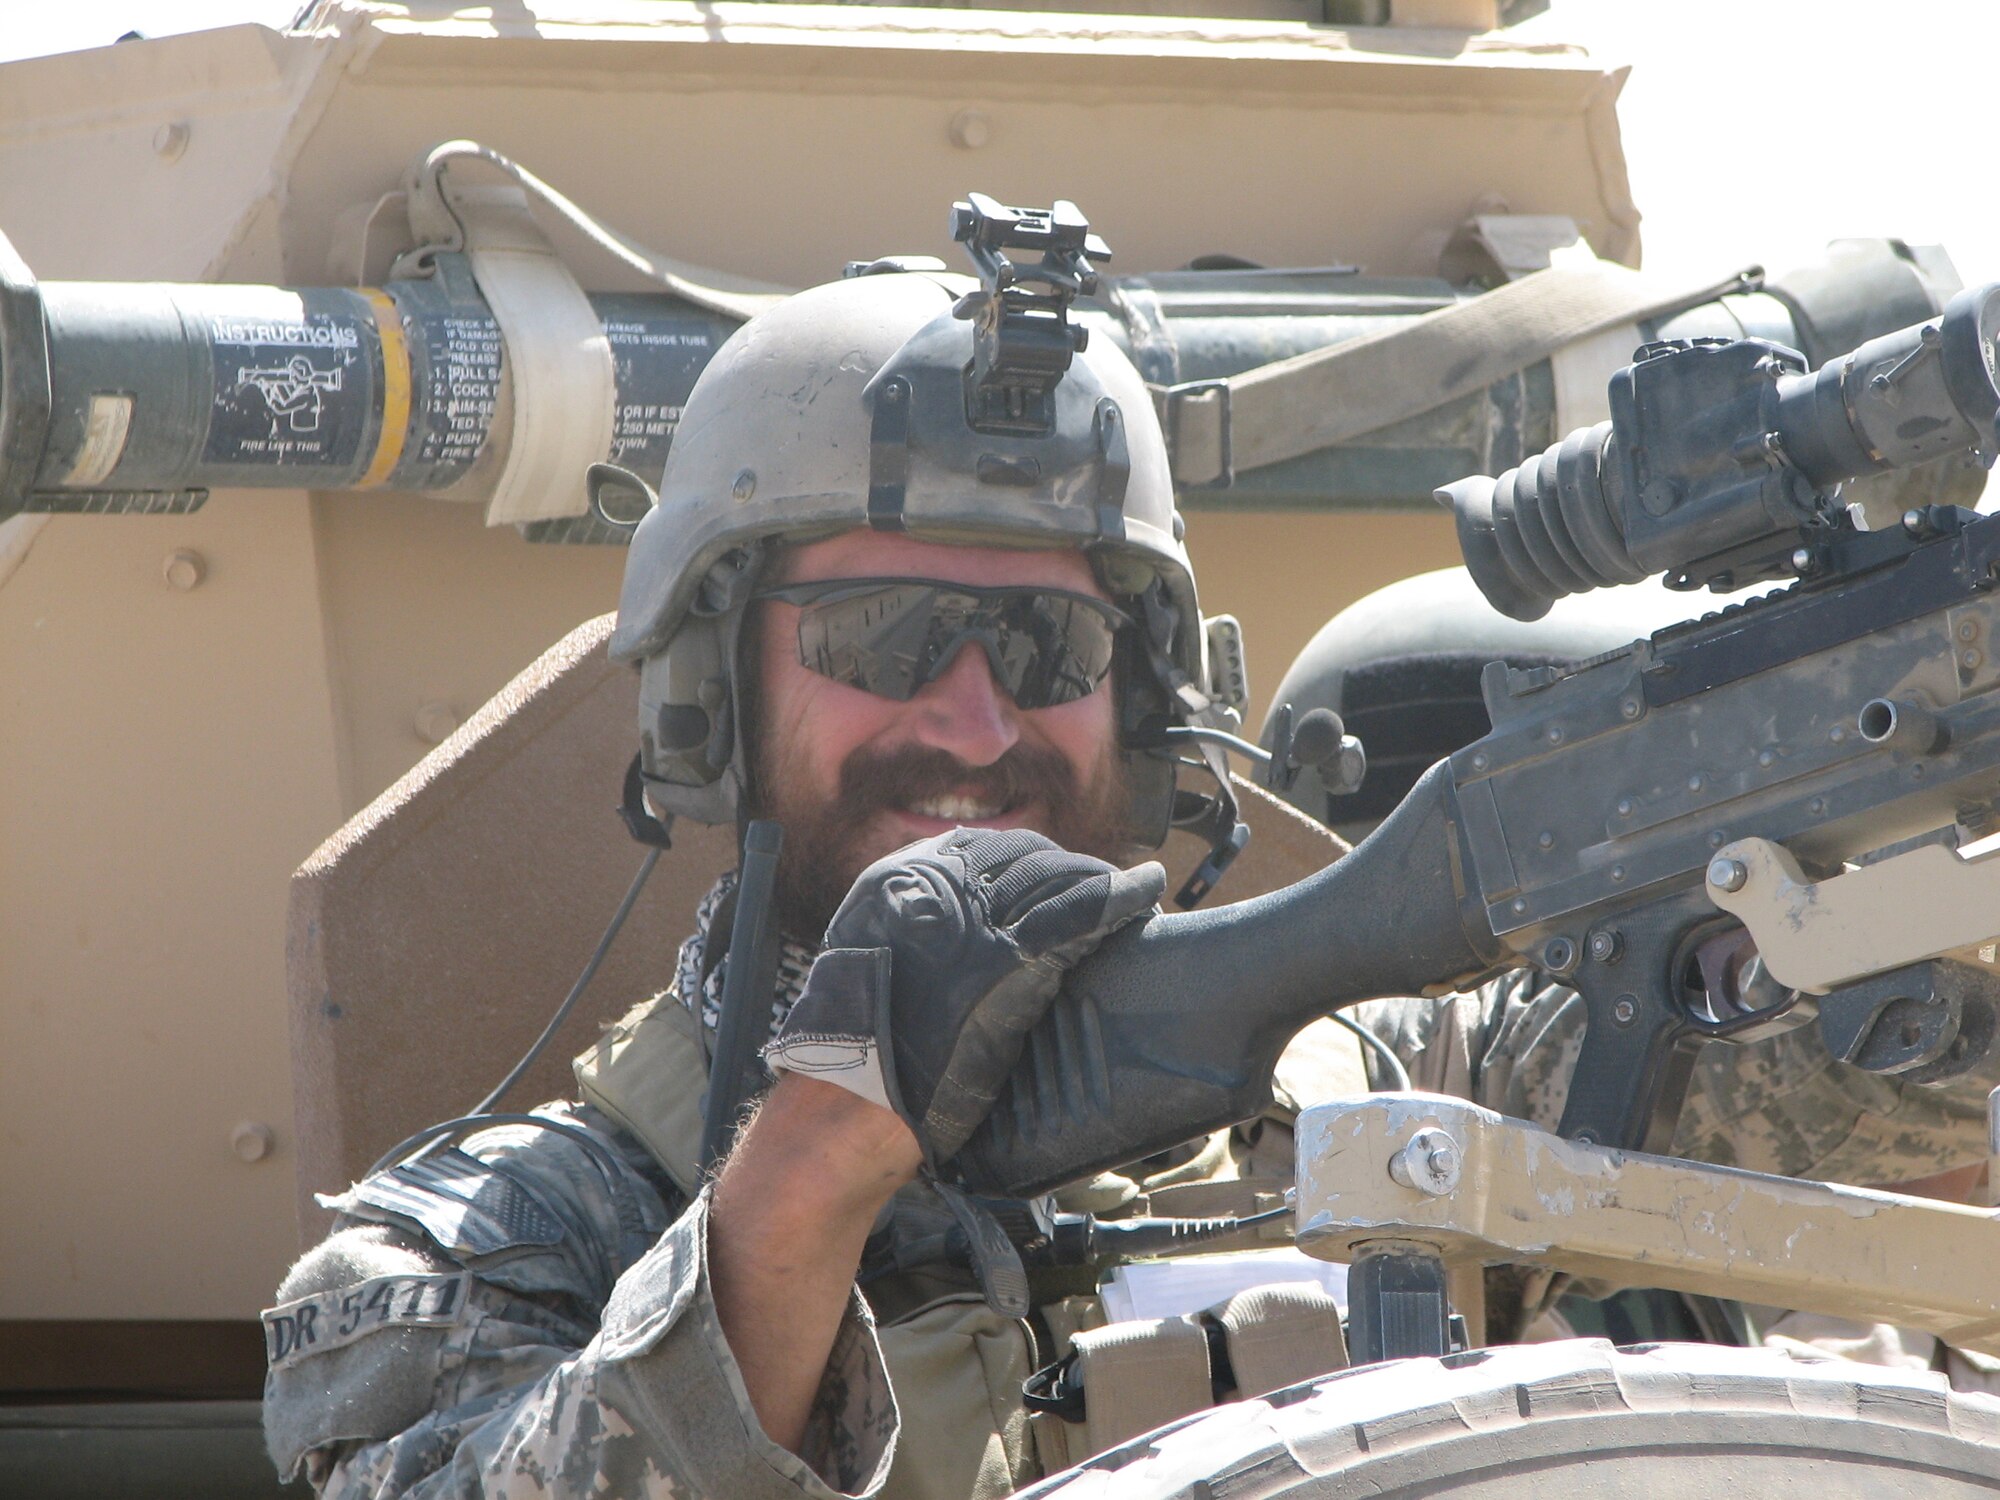 Tech. Sgt. Jason Dryer, a combat controller with the 22nd Special Tactics Squadron, is pictured during the unit's recent deployment to Southwest Asia.  During this deployment, the Humvee he and his Army Special Forces teammates were riding in detonated an improvised explosive device. Sergeant Dryer was thrown from the vehicle and knocked unconscious. Despite his serious injuries, the combat controller was able to return to his forward operating base to finish his rotation. Sergeant Dryer received a Purple Heart for this incident, and earned a Bronze Star with valor for his actions during a firefight with Taliban forces later in the same deployment. He was presented these medals and an Air Force Combat Action Medal during a ceremony Dec. 18 at McChord Air Force Base, Wa. (Courtesy photo)